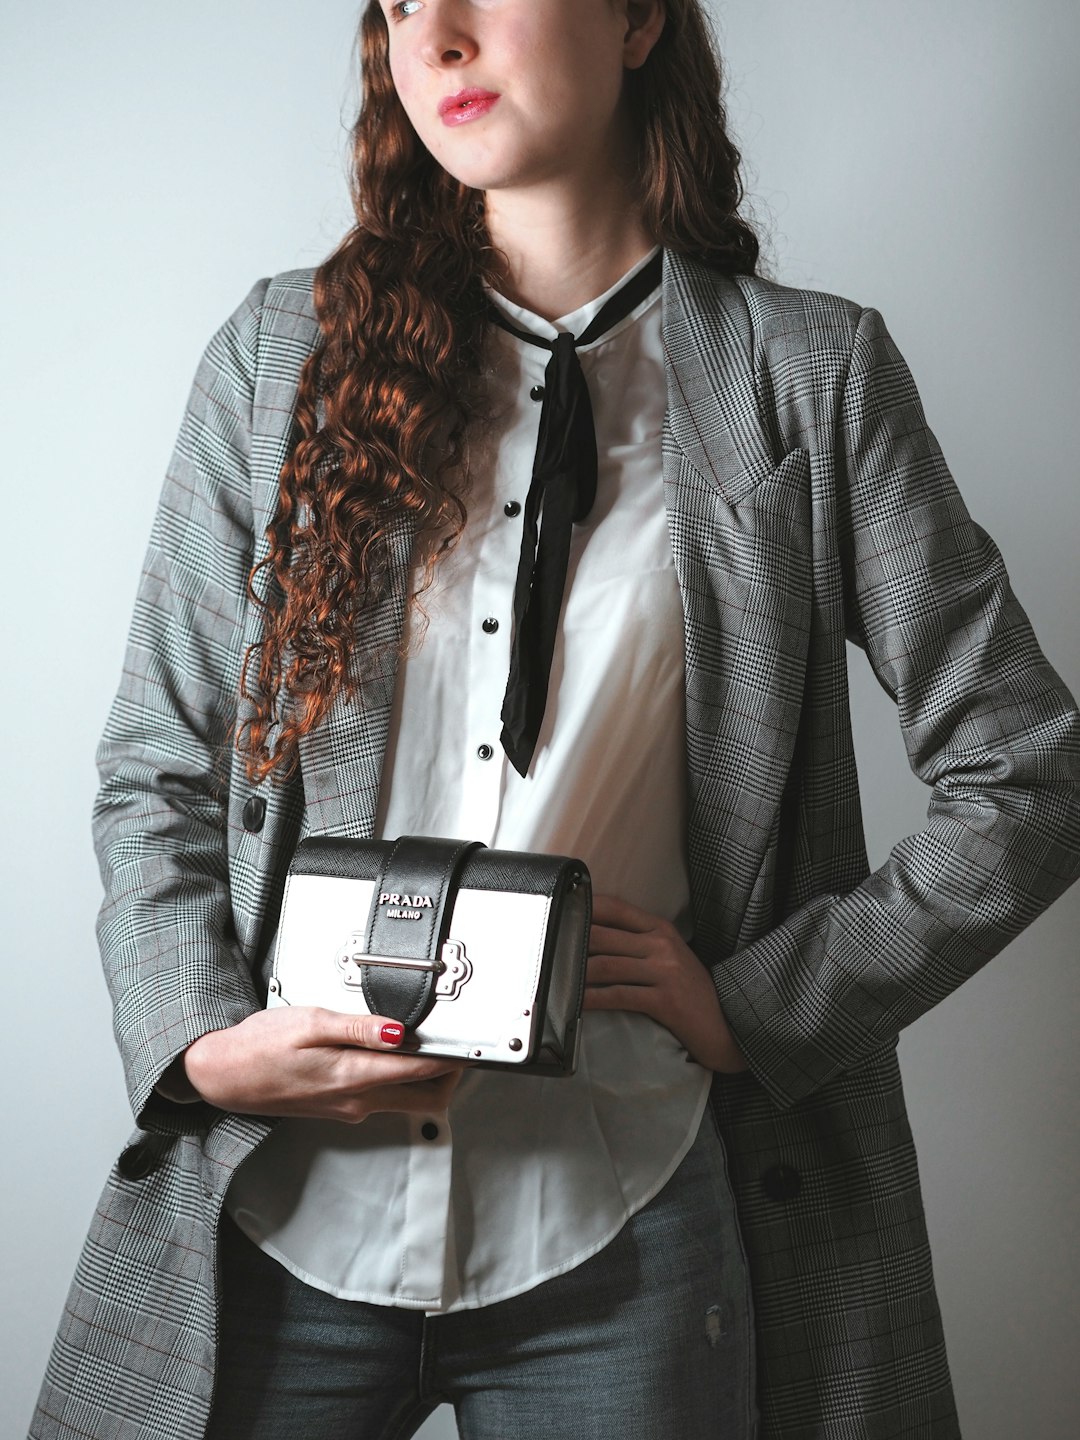 woman in gray blazer holding black and white camera